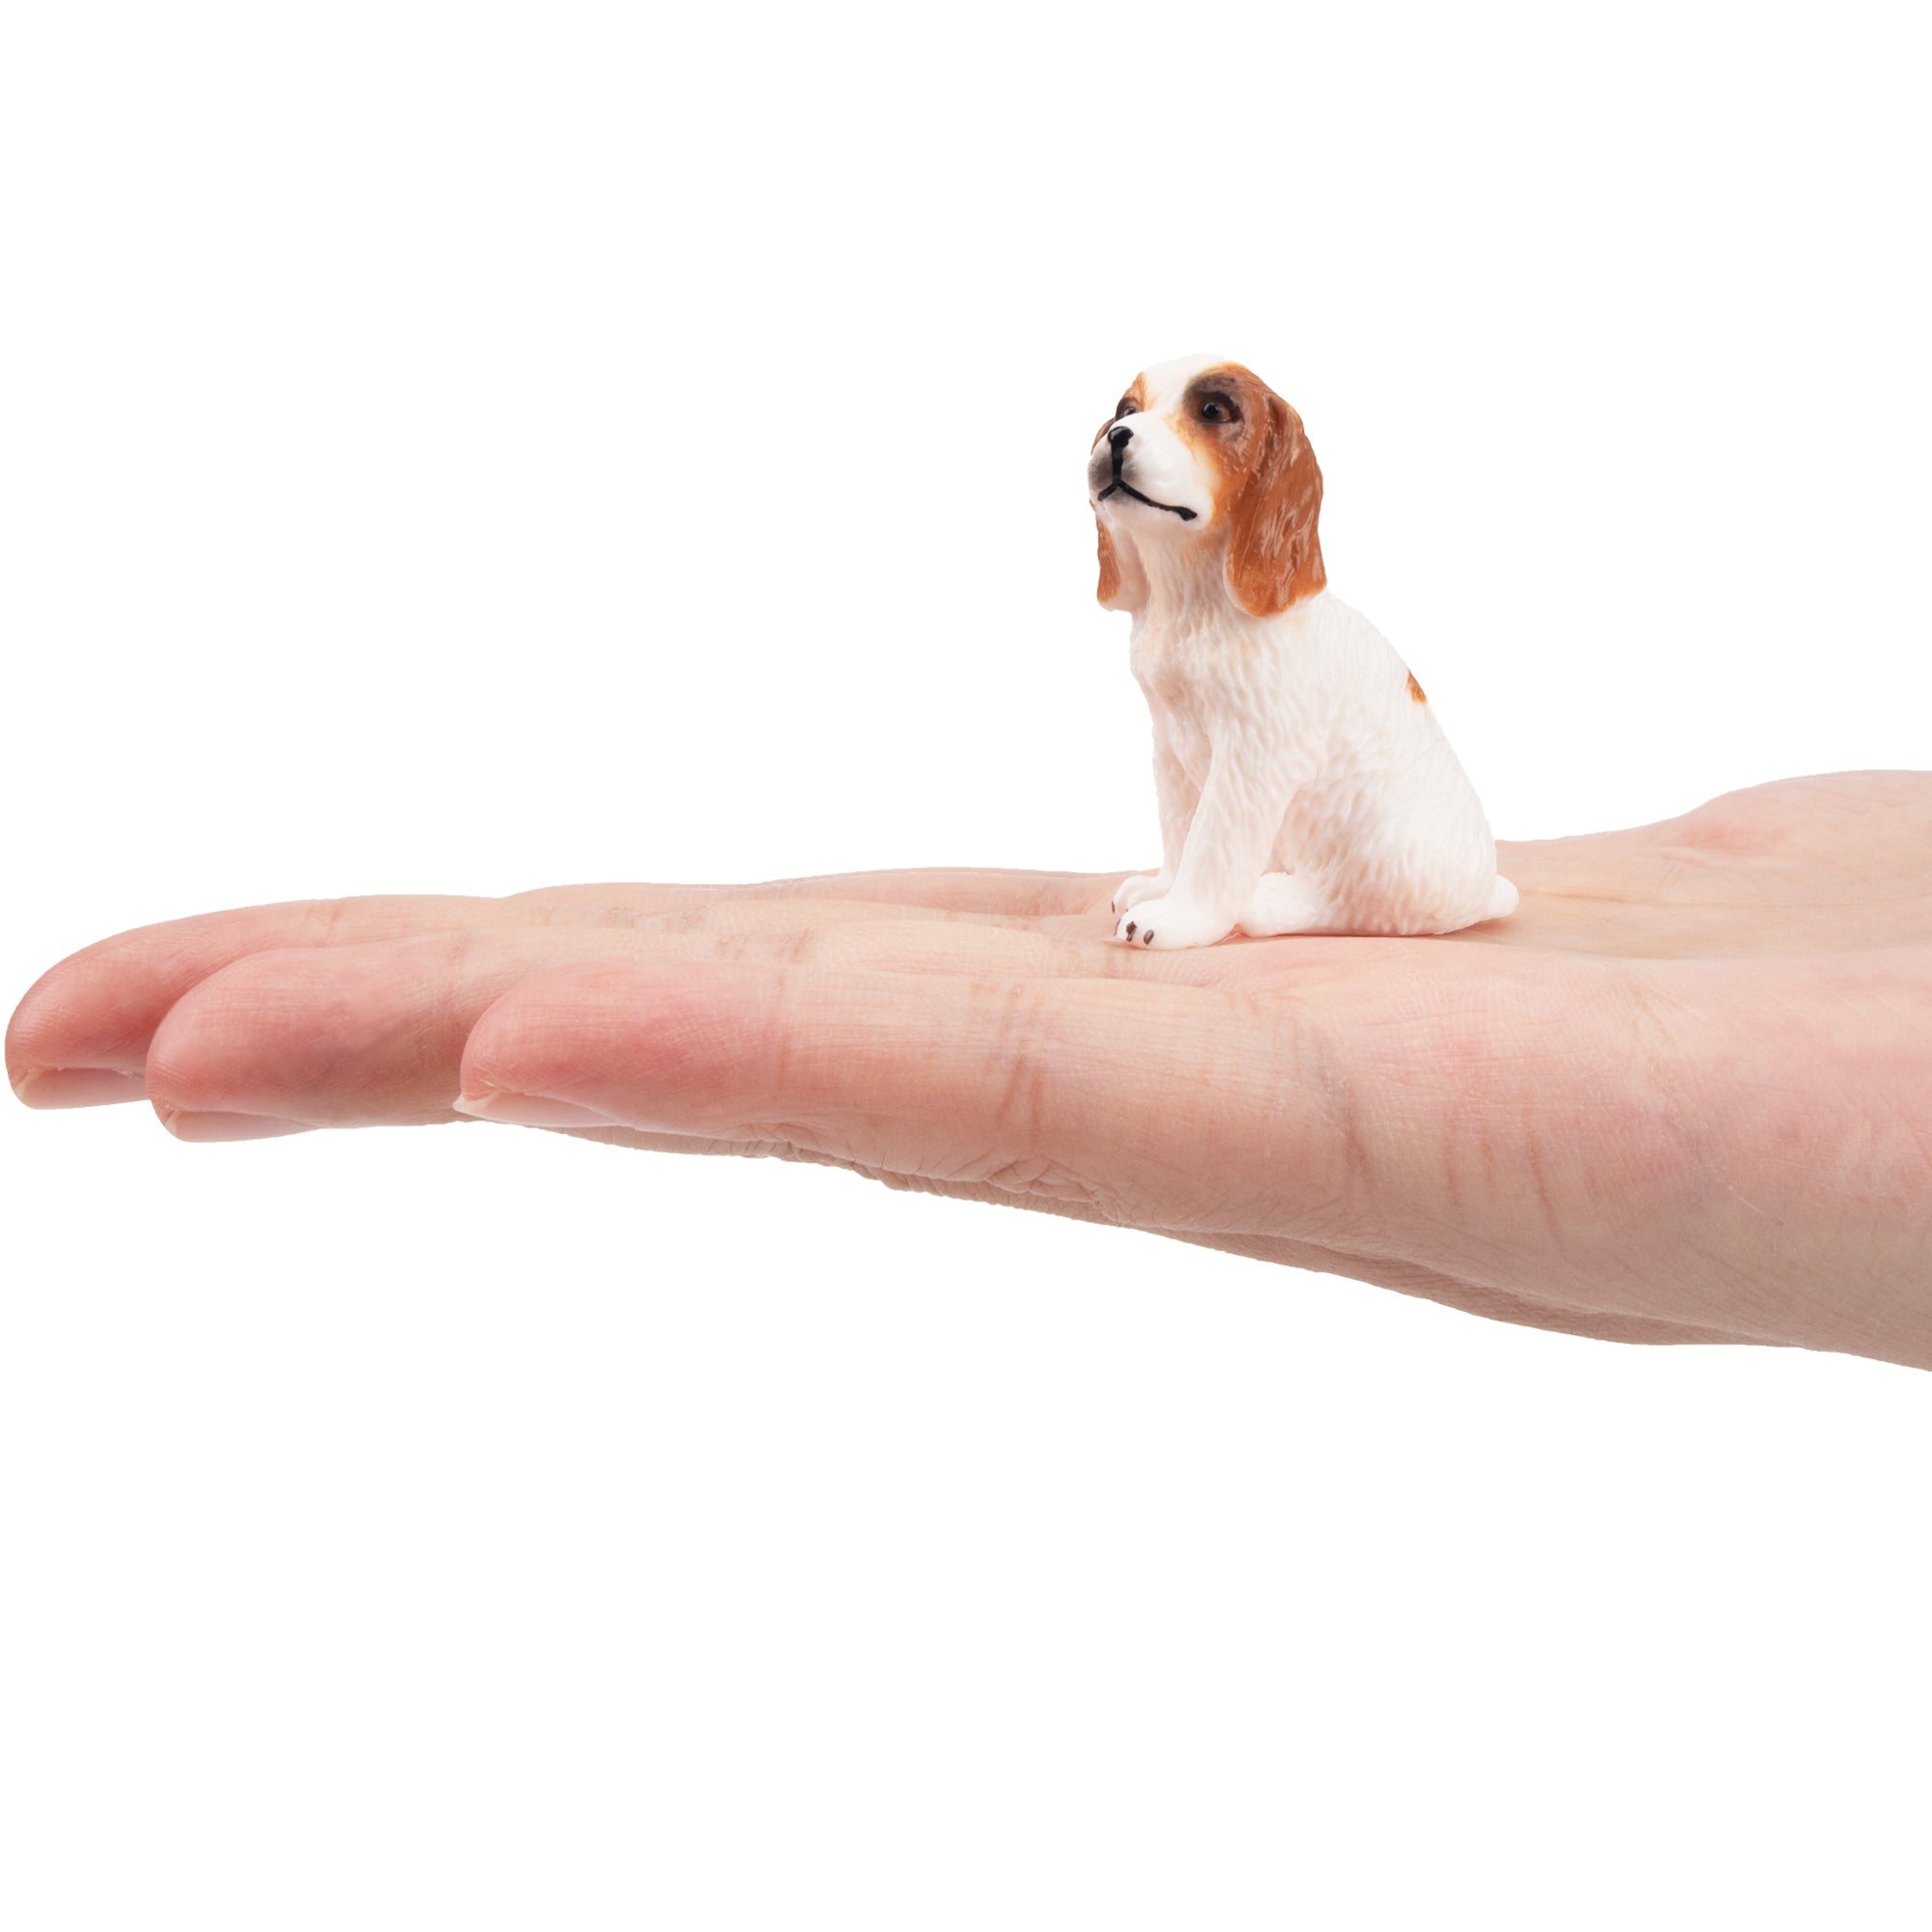 Toymany Mini Sitting Liver and White Cocker Spaniel Puppy Figurine Toy-on hand